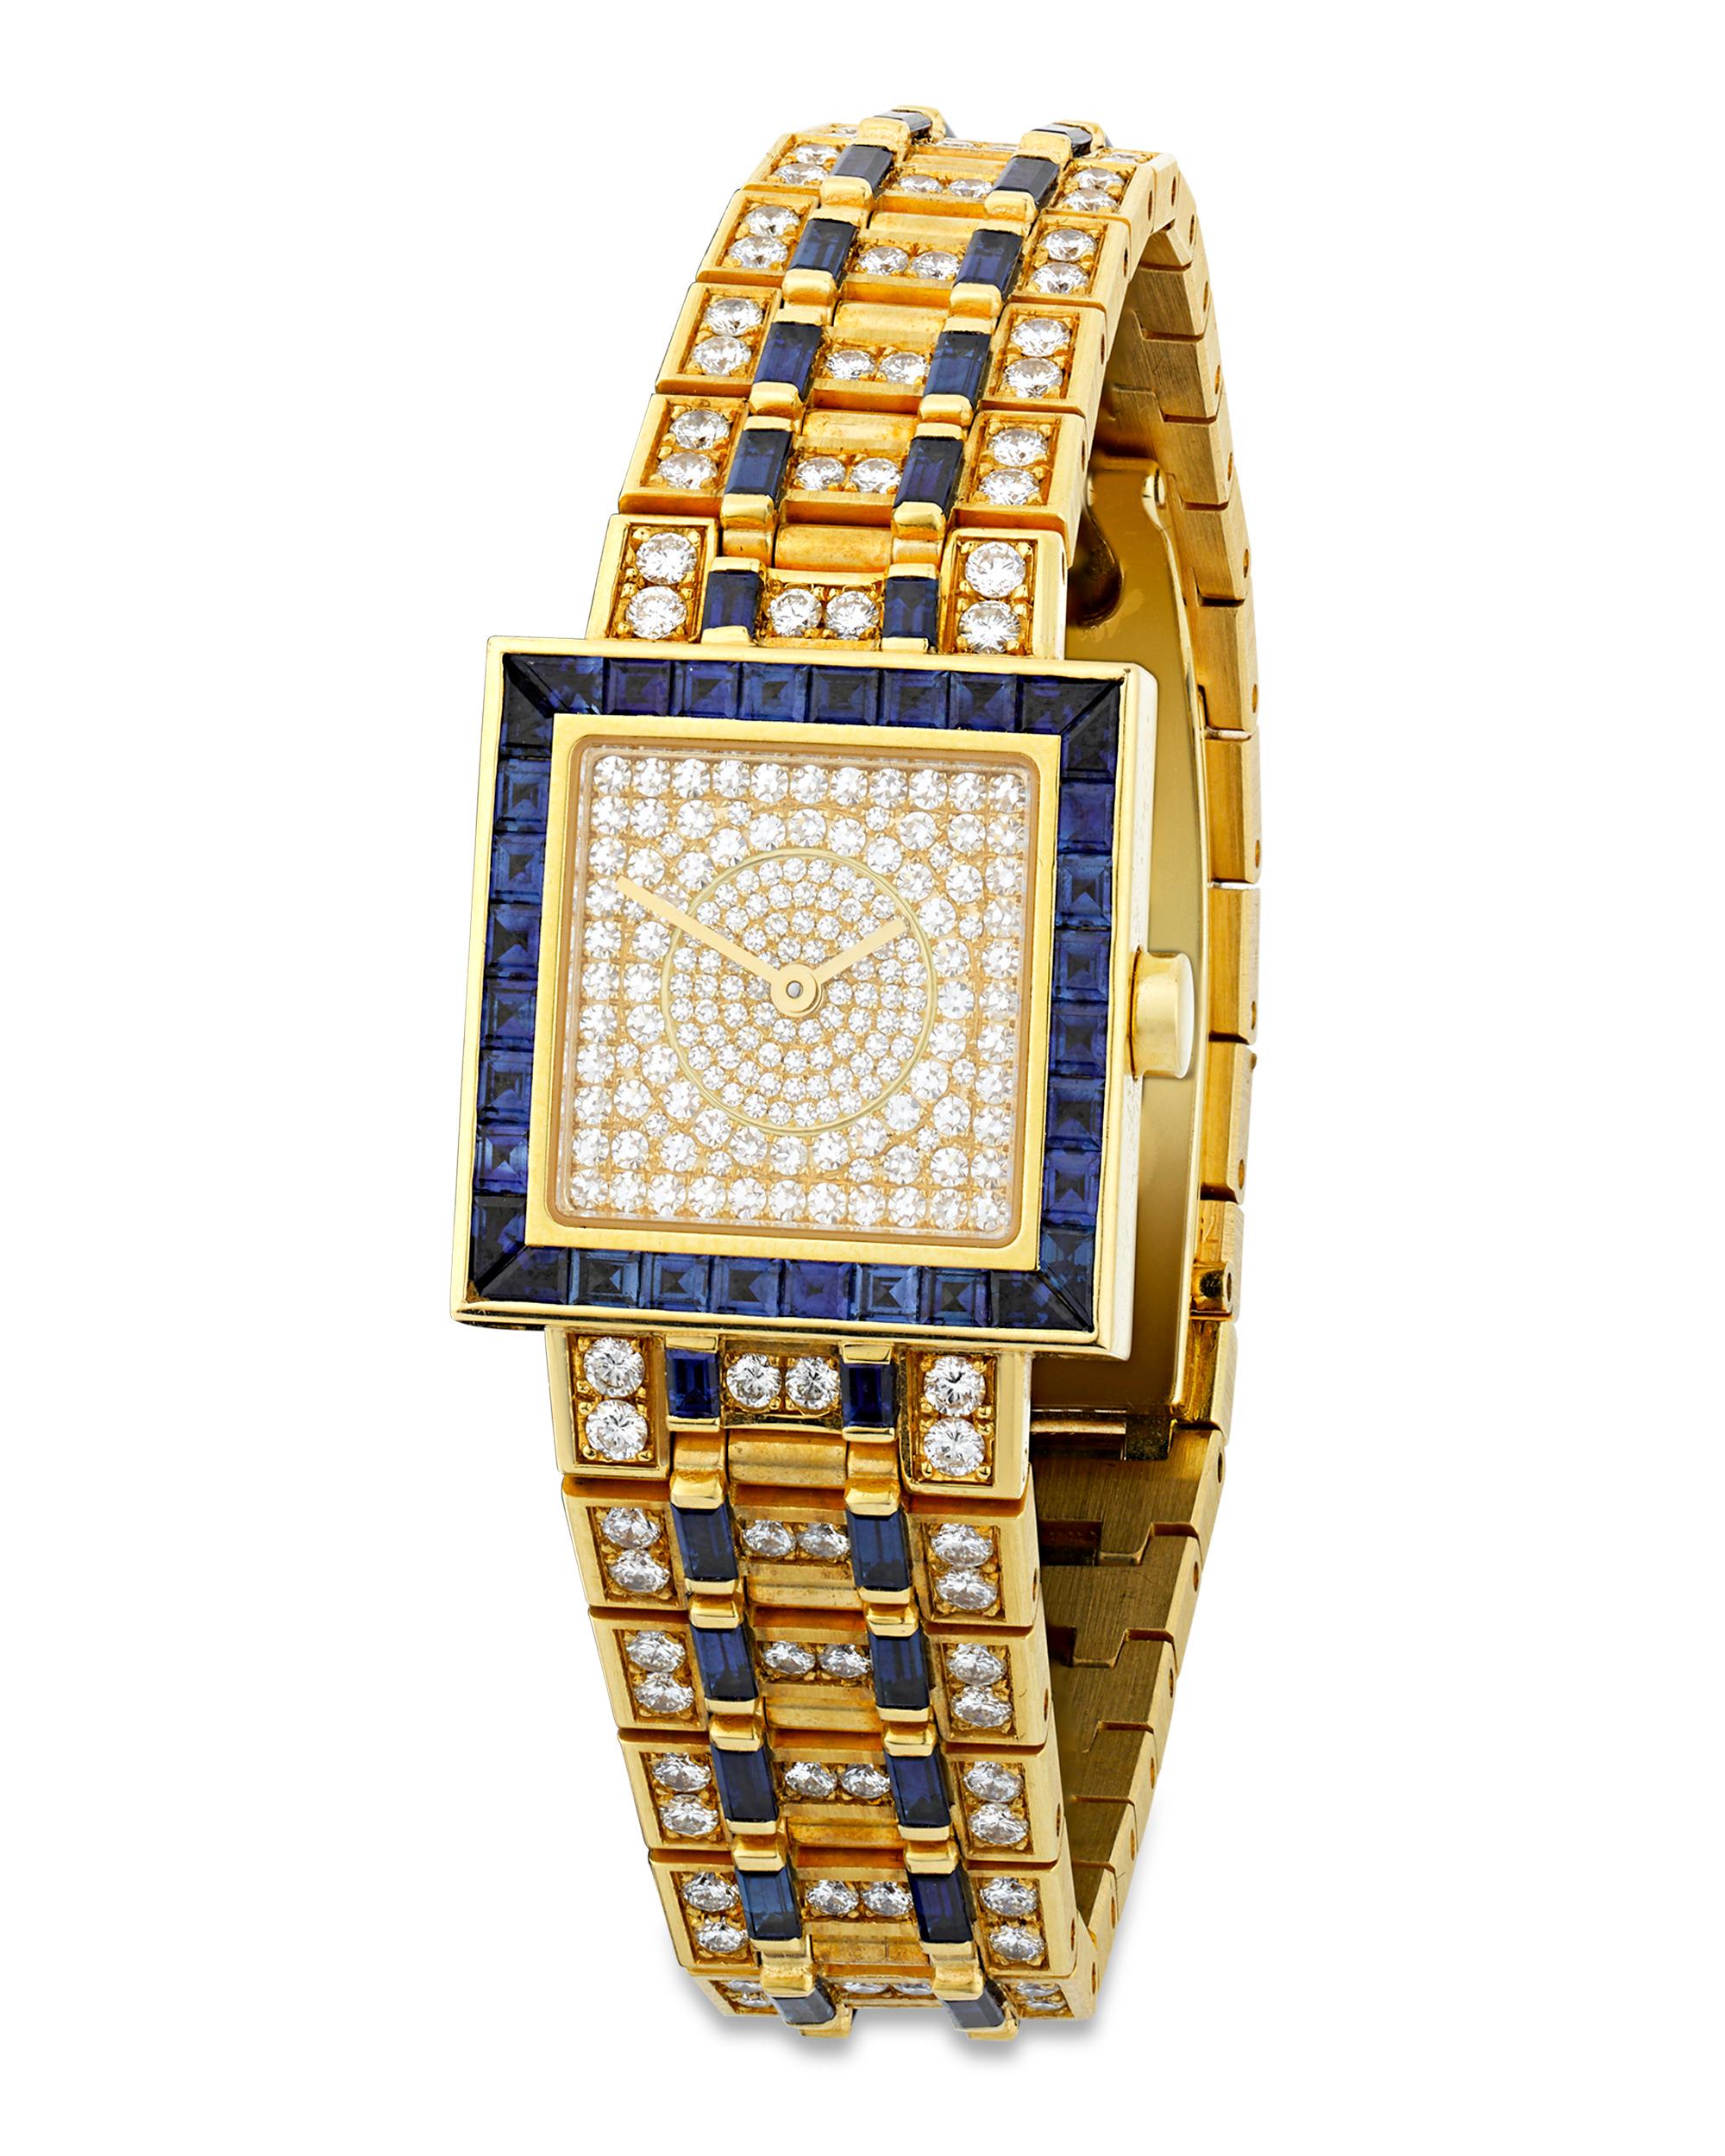 This eye-catching Quadrato wristwatch was crafted by the high-end Italian jeweler Bulgari. An array of pavé-set white diamonds totaling approximately 4.51 carats adorn the watch, which is crafted of 18K yellow gold in a dazzling link design. Deep